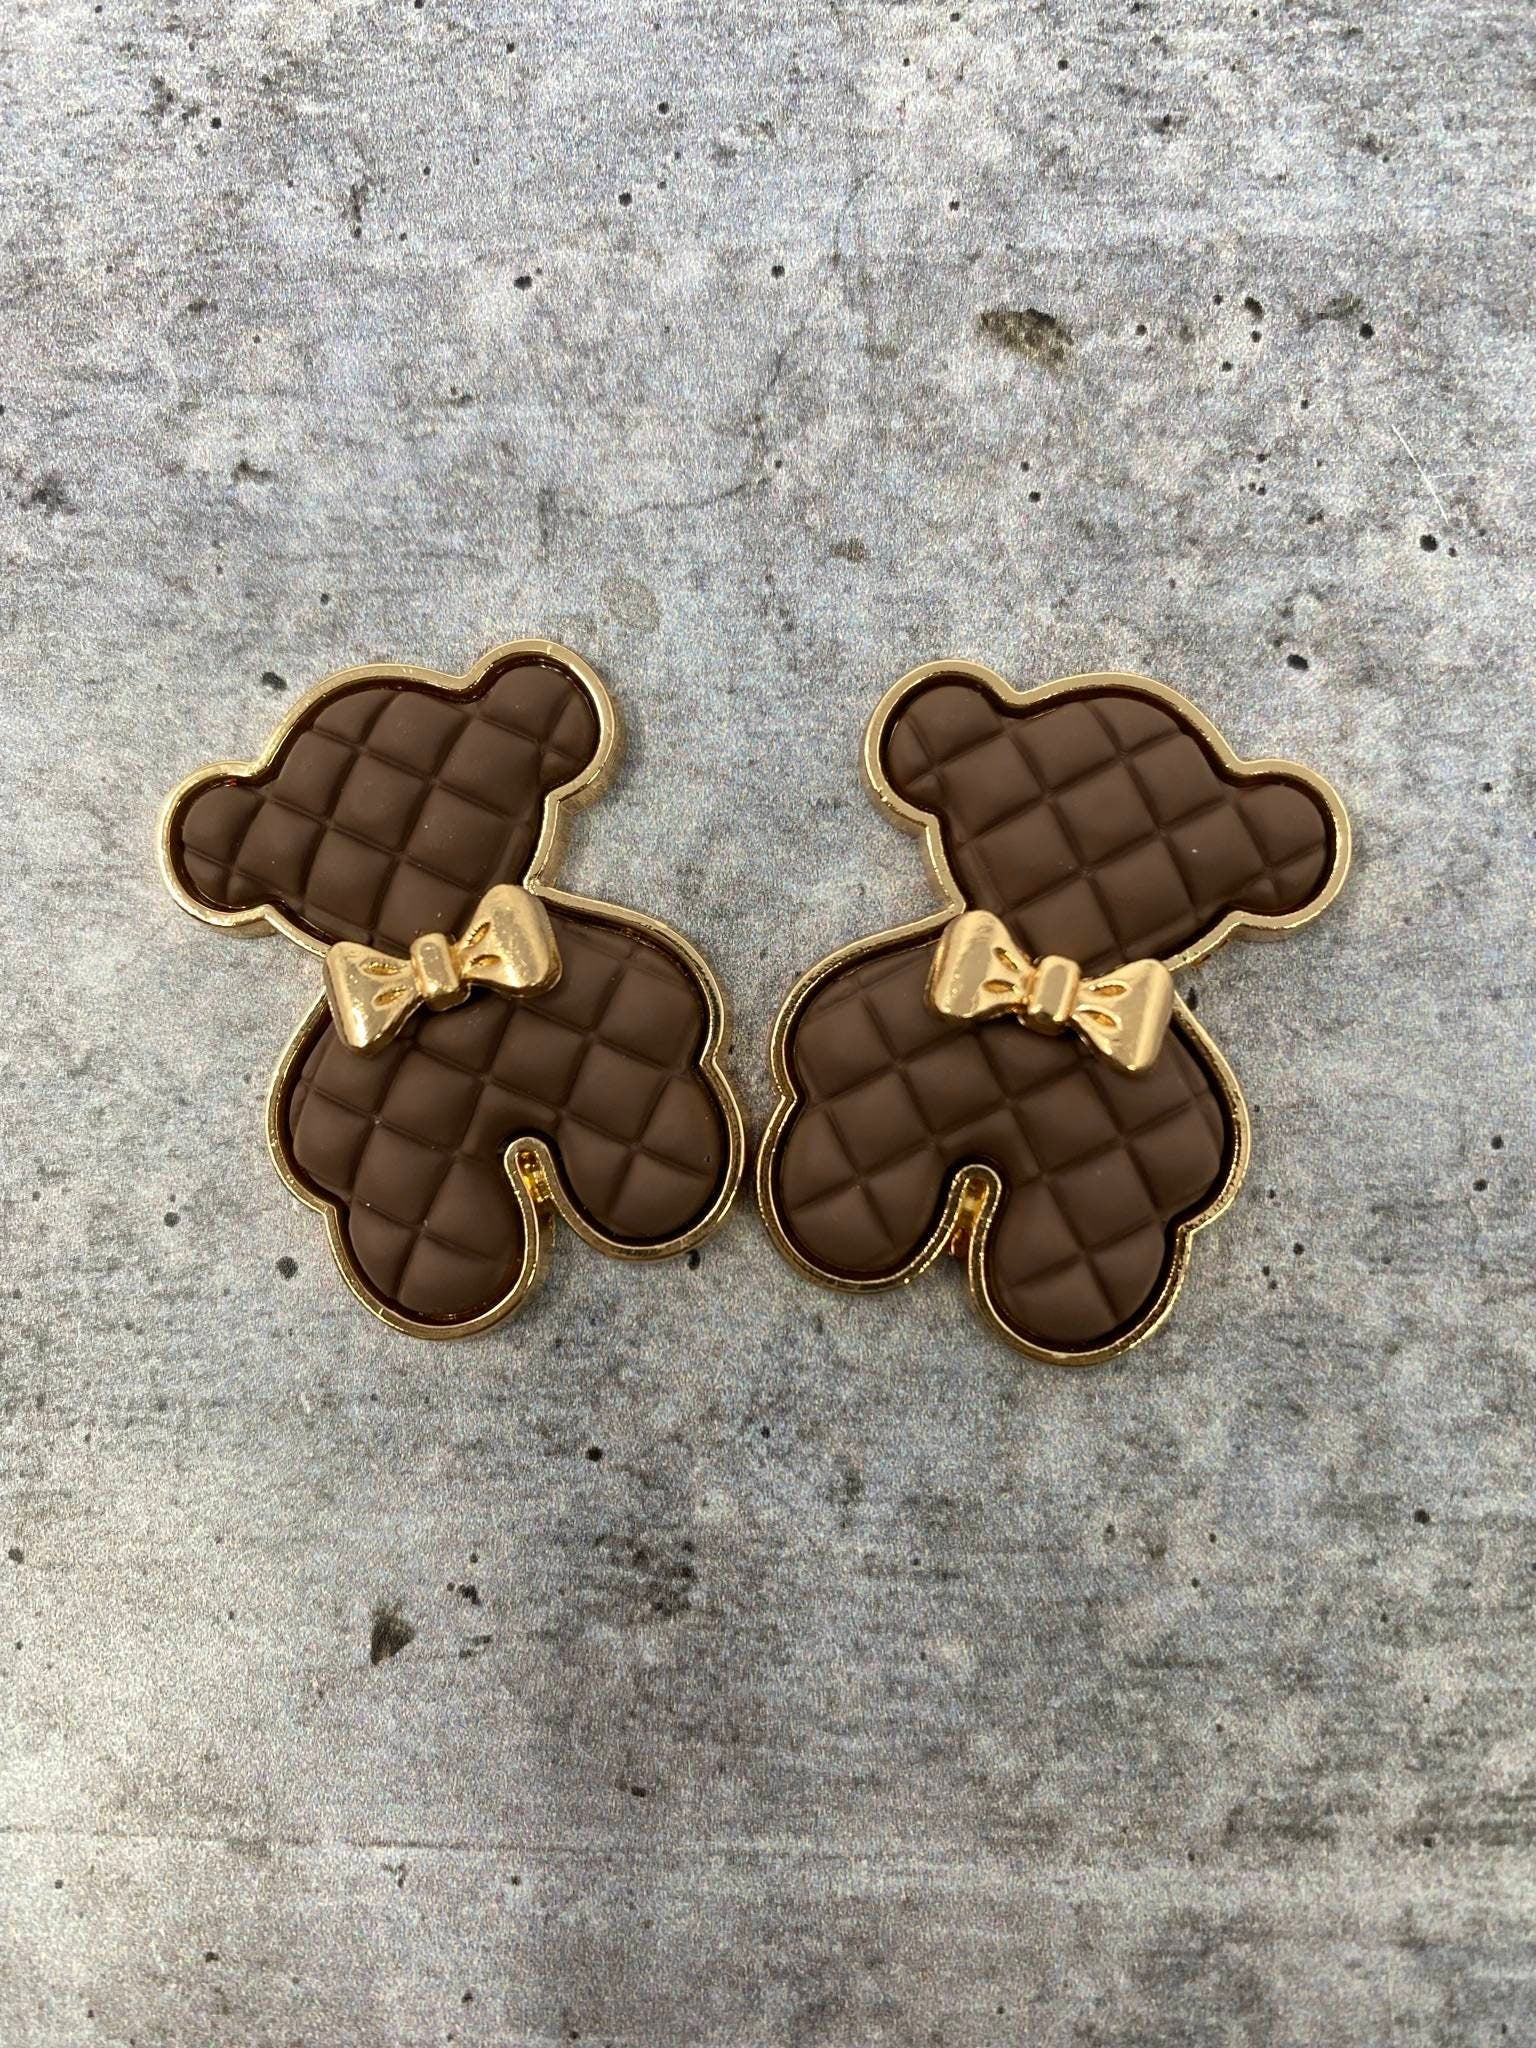 Exclusive, Chocolate "Bear" Tufted w/Gold Bow Charm, 1-pc Flatback Charm for CR O CS, Phone Cases, Sunglasses, Decor, and More! Size 2"